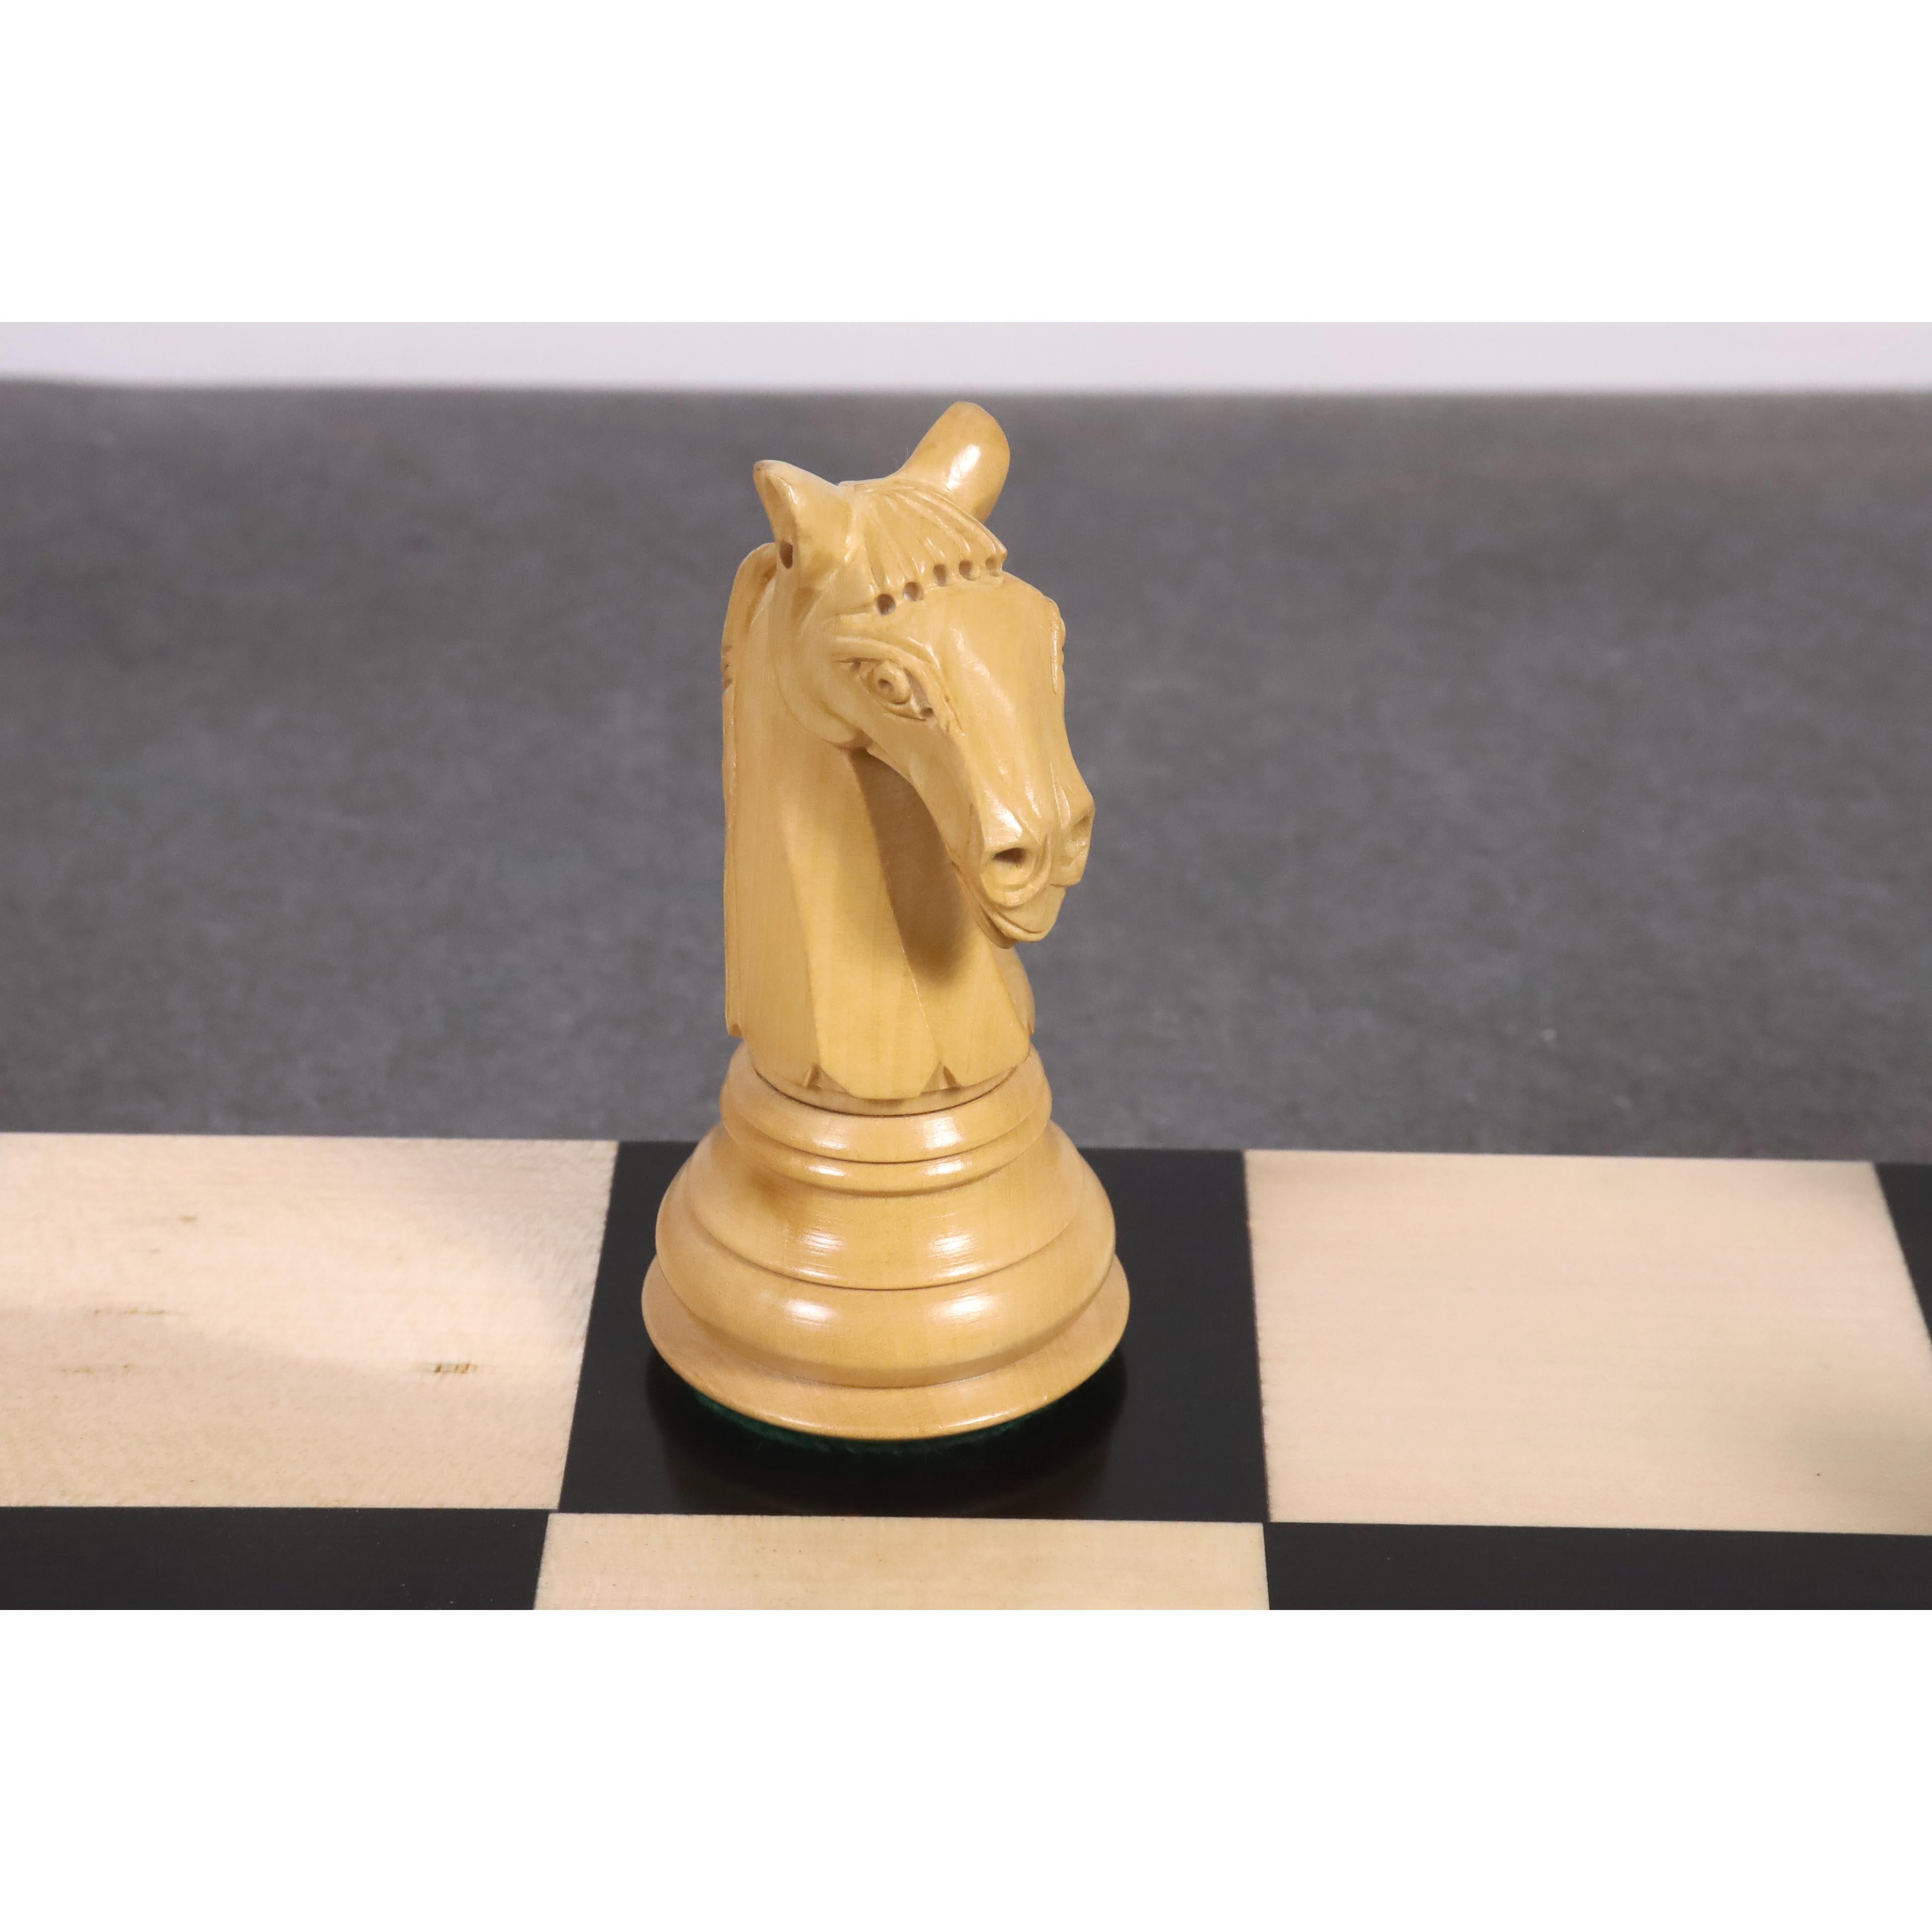 What Are Triple Weighted/ Double/Non-Weighted Chess Pieces?